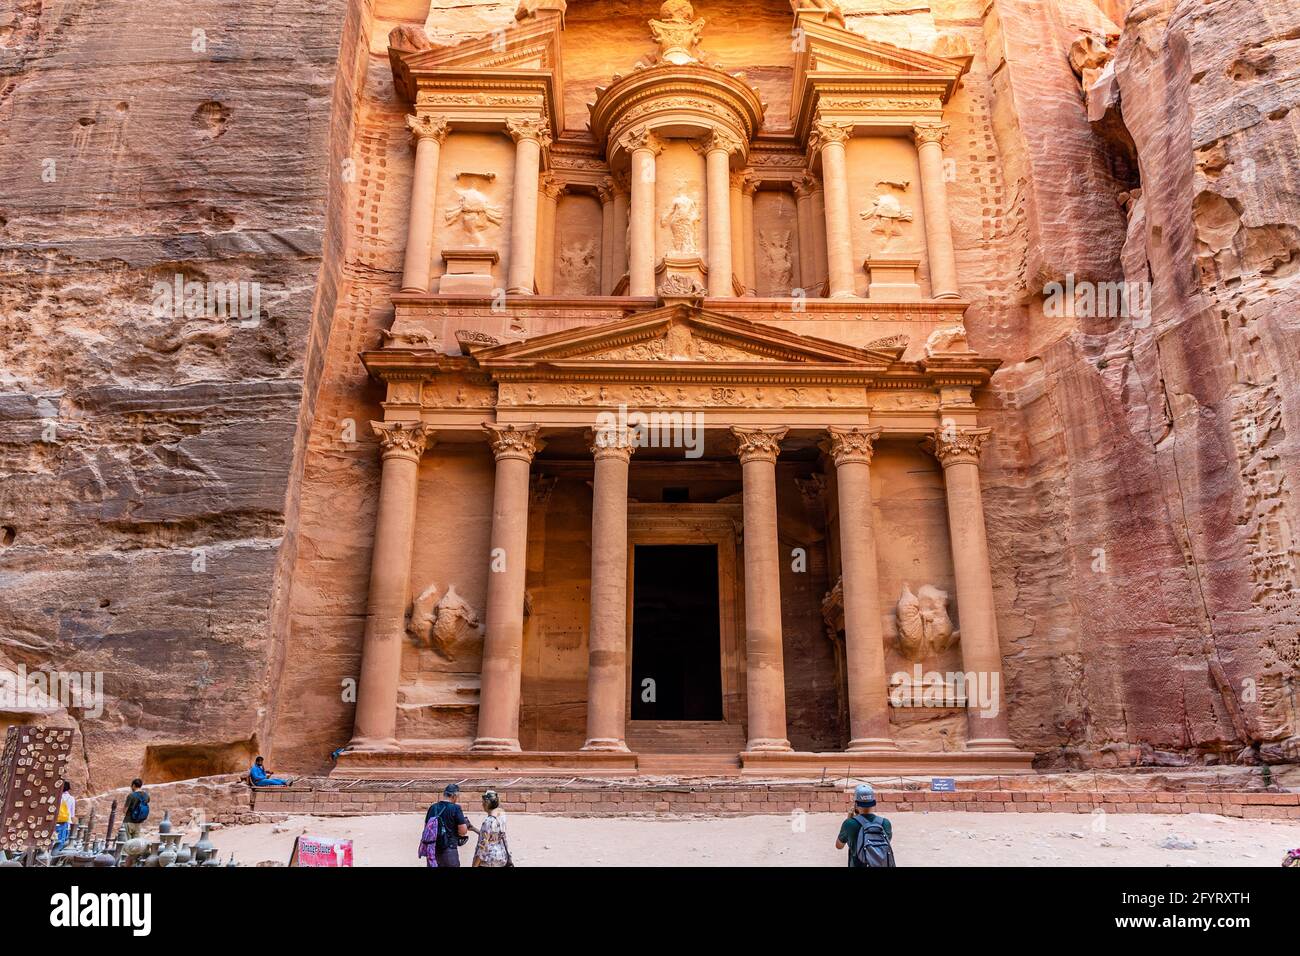 Full front view of Treasury, Al-Khazneh touched by erosion patterns, one of the seven wonders of the ancient world was carved in red-rose stone, Petra Stock Photo